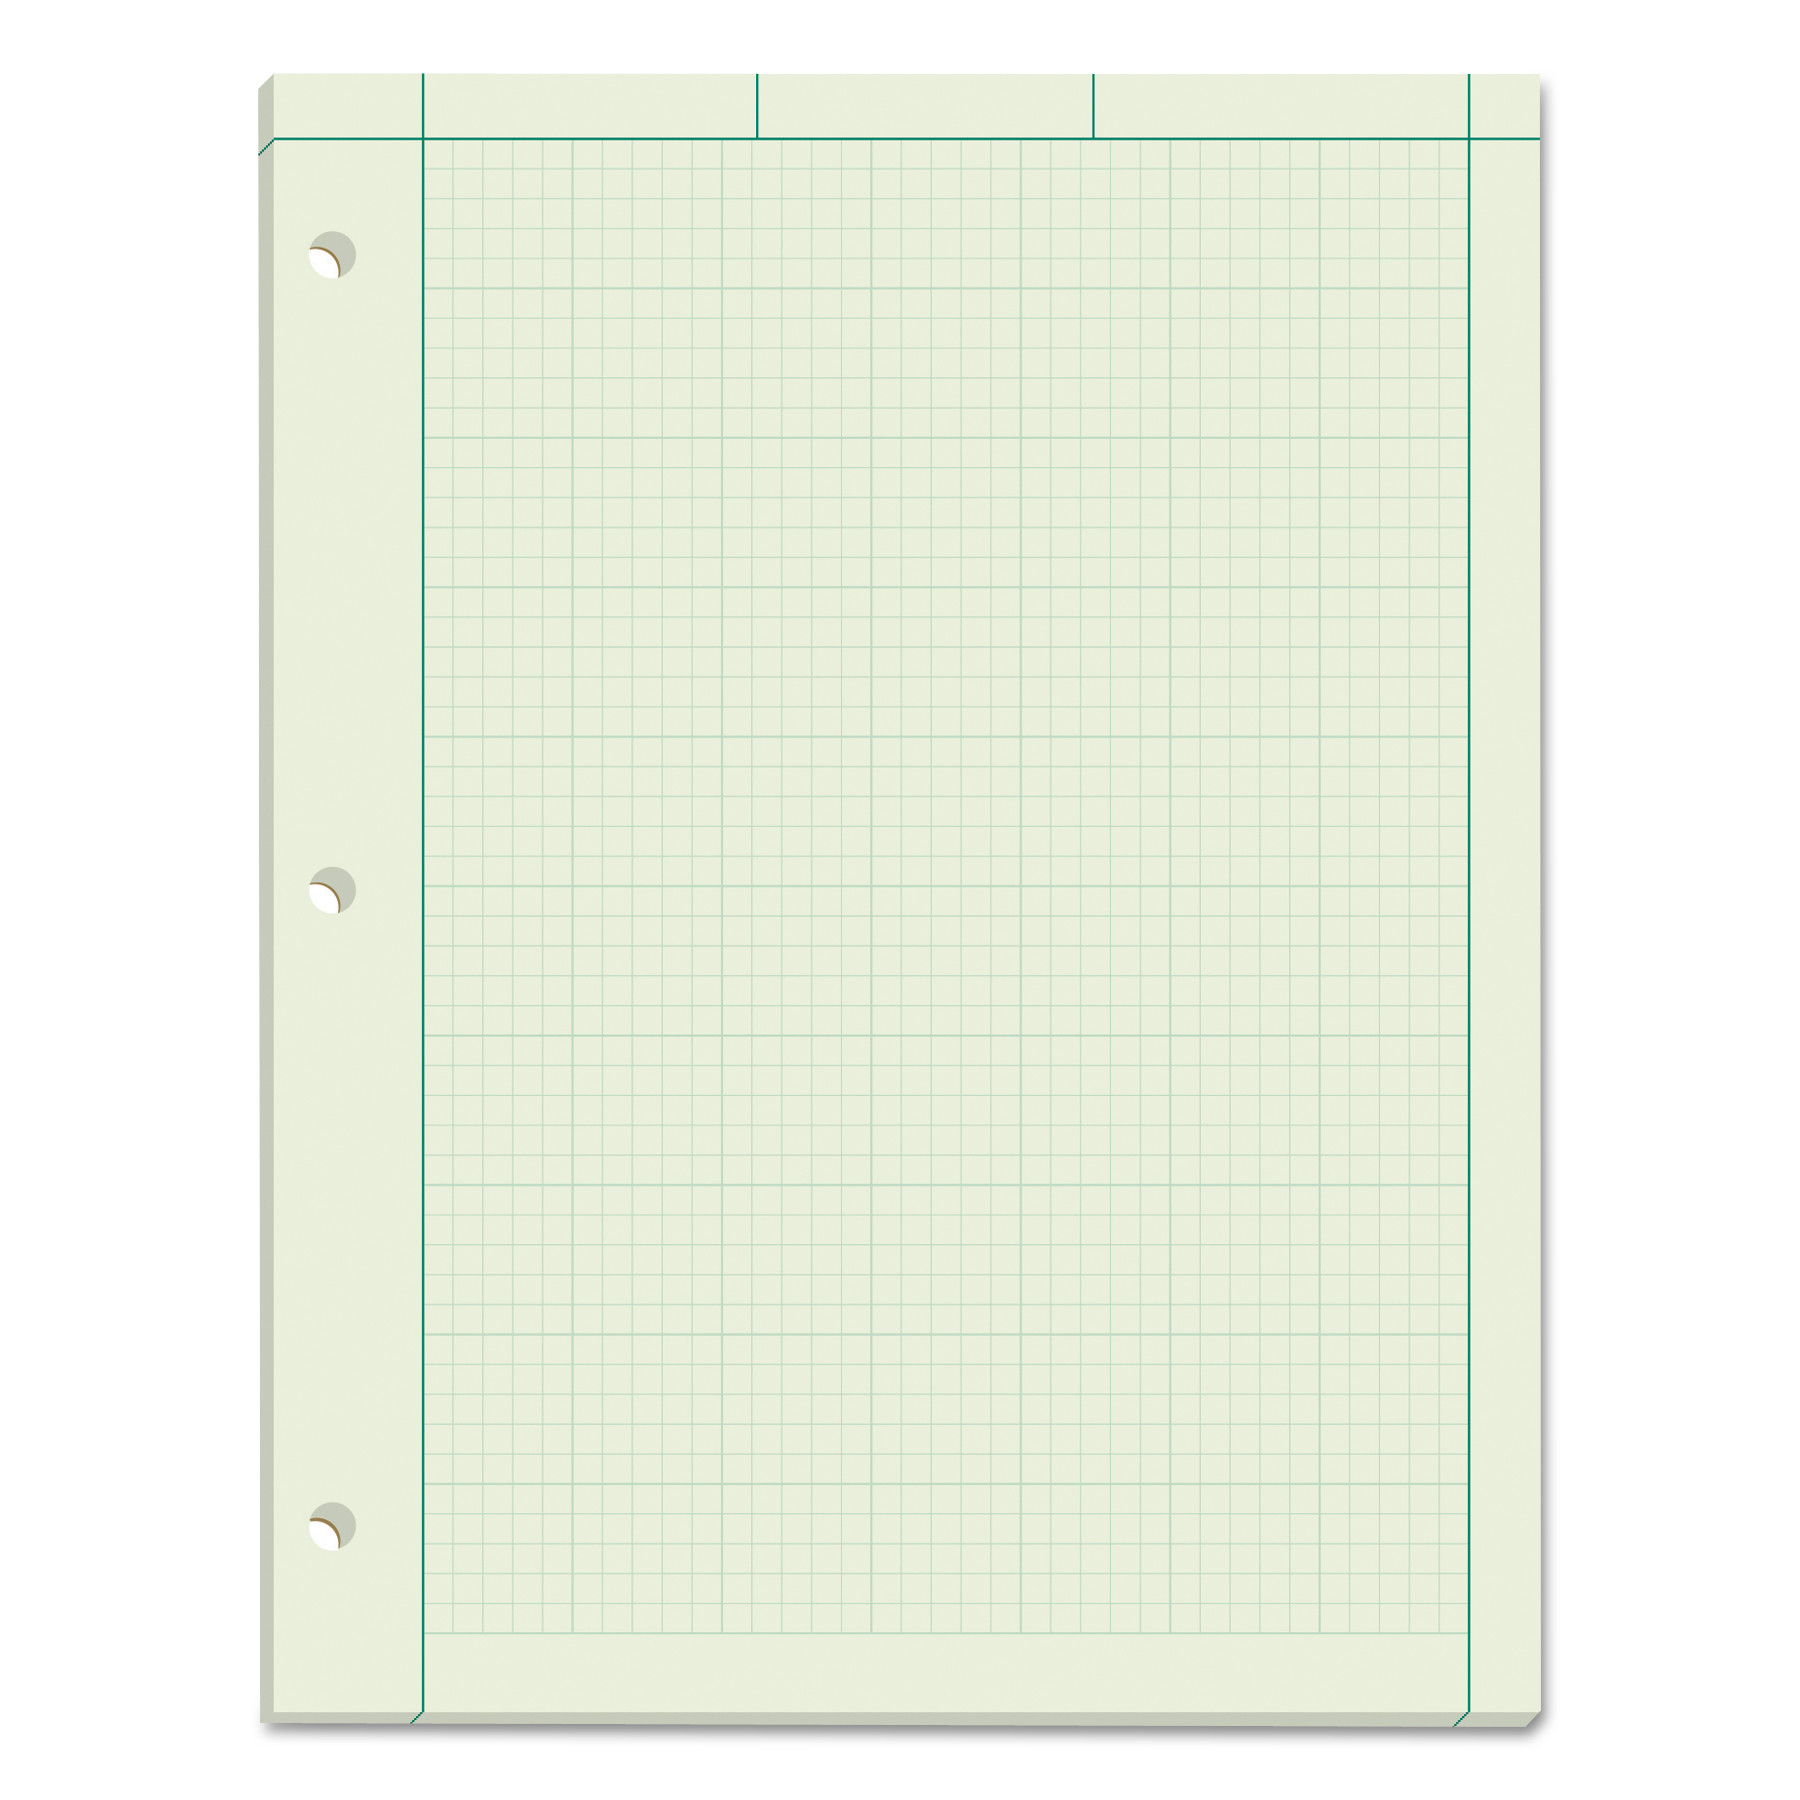  TOPS 35500 Engineering Computation Pads, 5 sq/in Quadrille Rule, 8.5 x 11, Green Tint, 100 Sheets (TOP35500) 